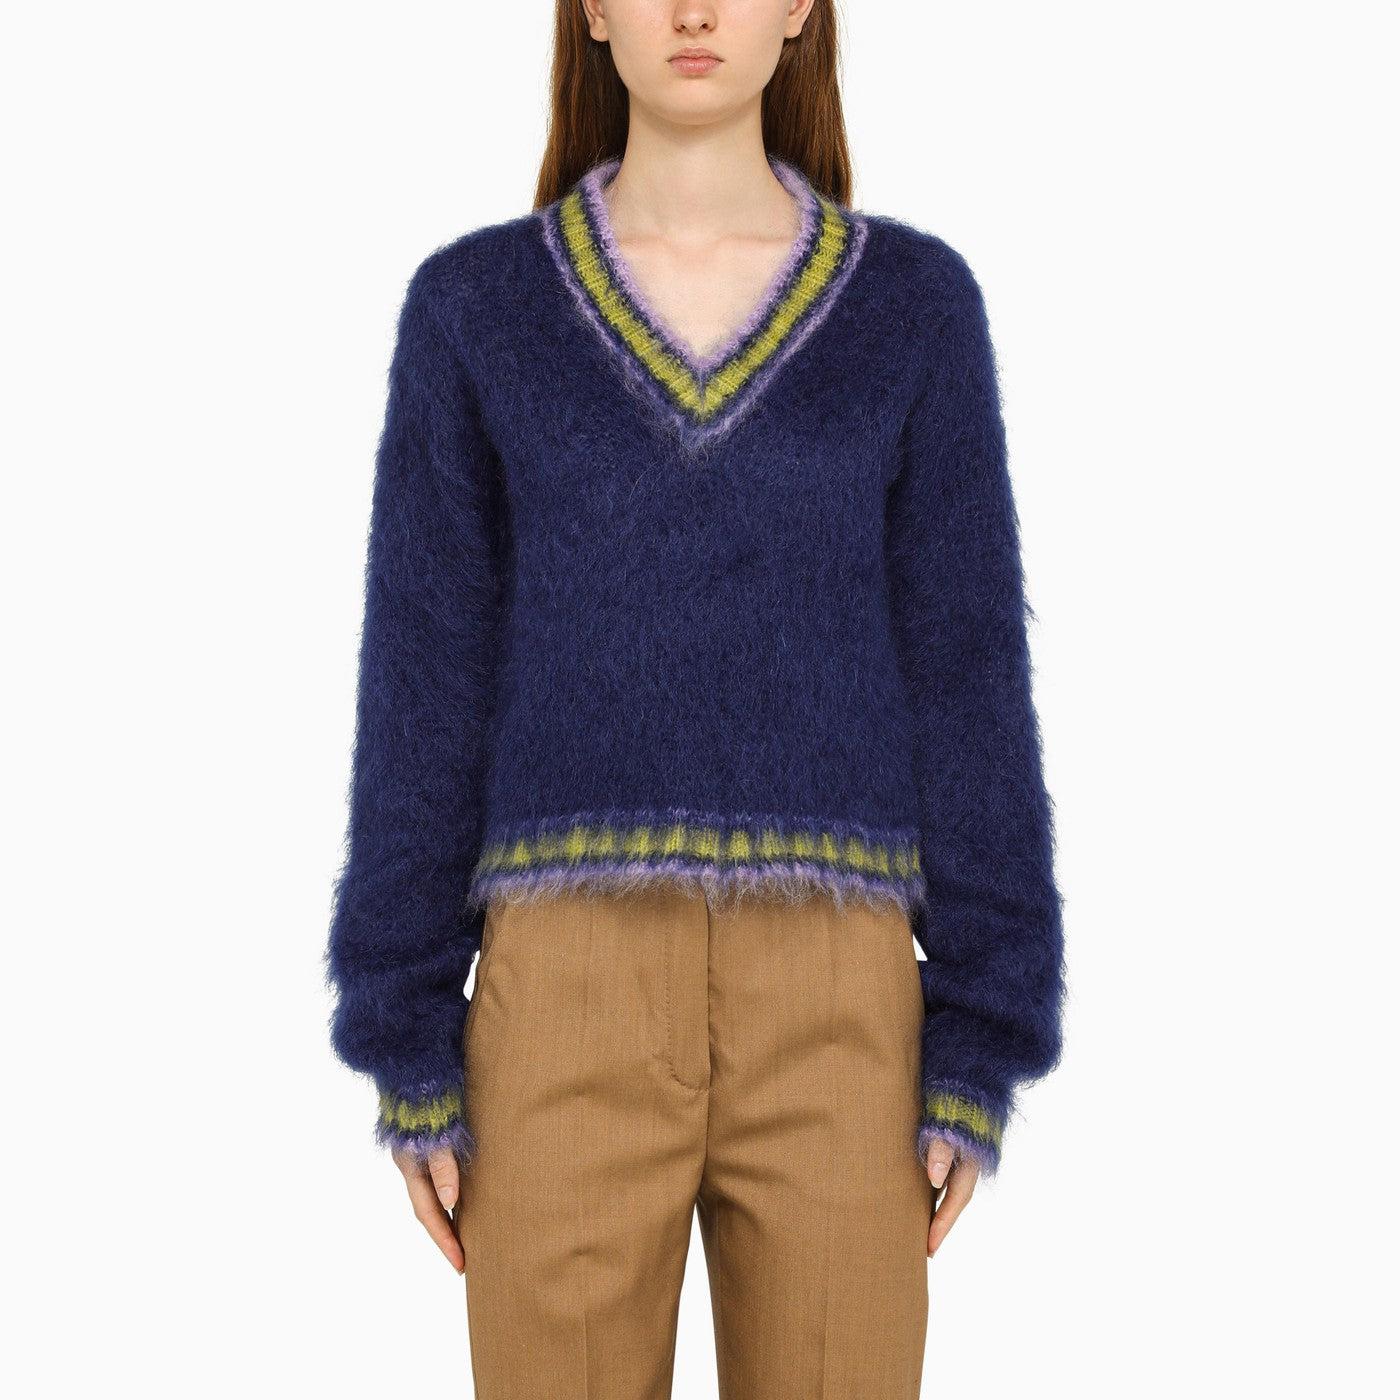 Marni - Yellow Mohair V-Neck Cardigan - Pullovers - Woman - Size: 38